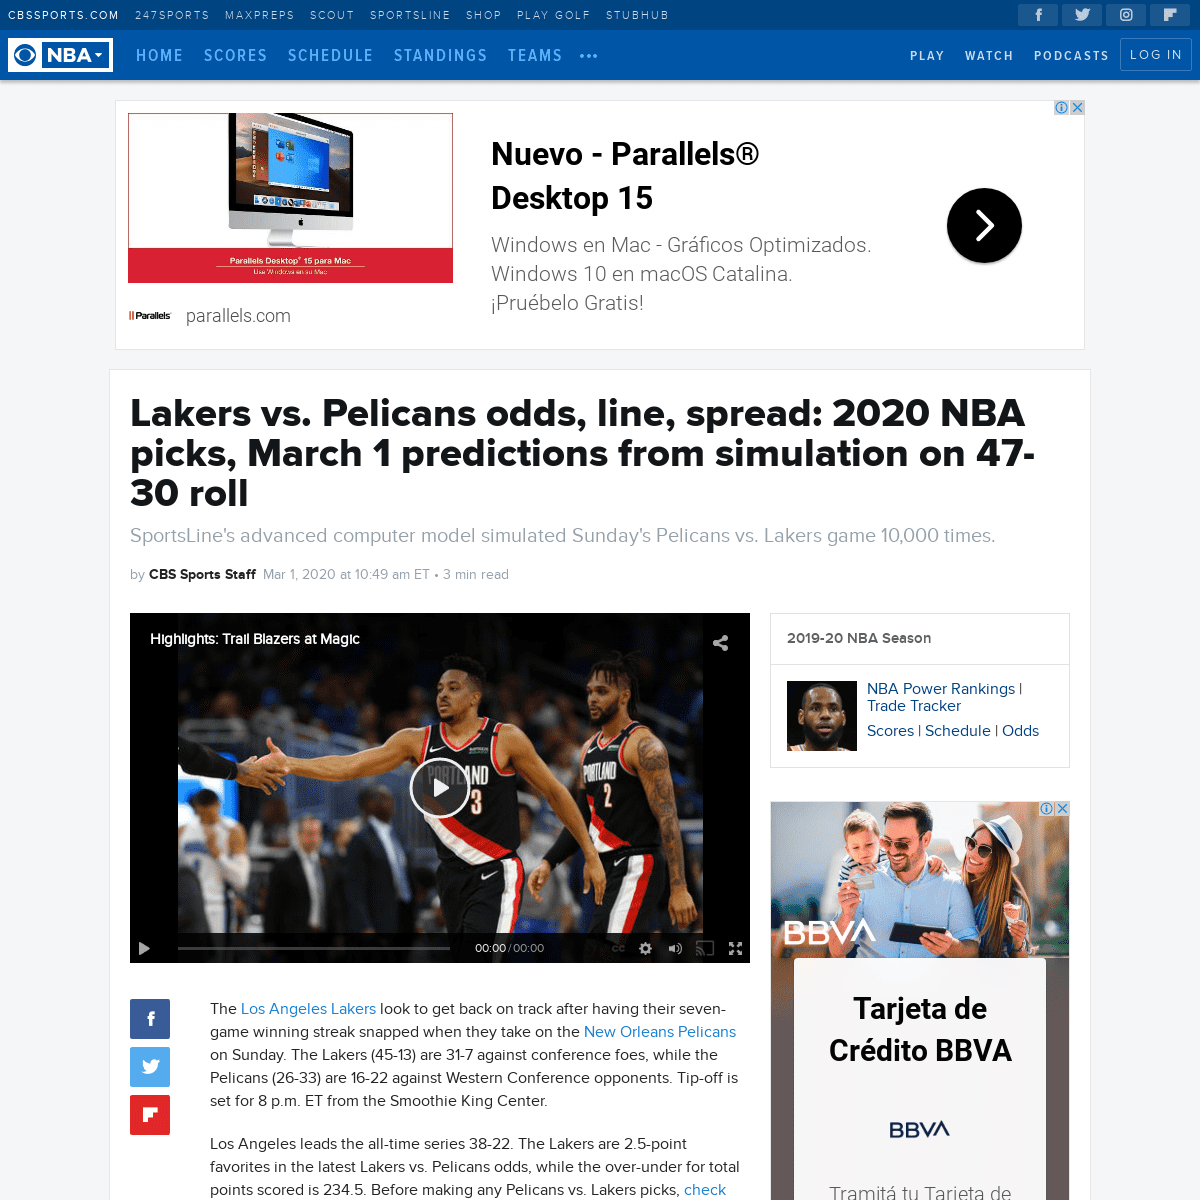 A complete backup of www.cbssports.com/nba/news/lakers-vs-pelicans-odds-line-spread-2020-nba-picks-march-1-predictions-from-simu